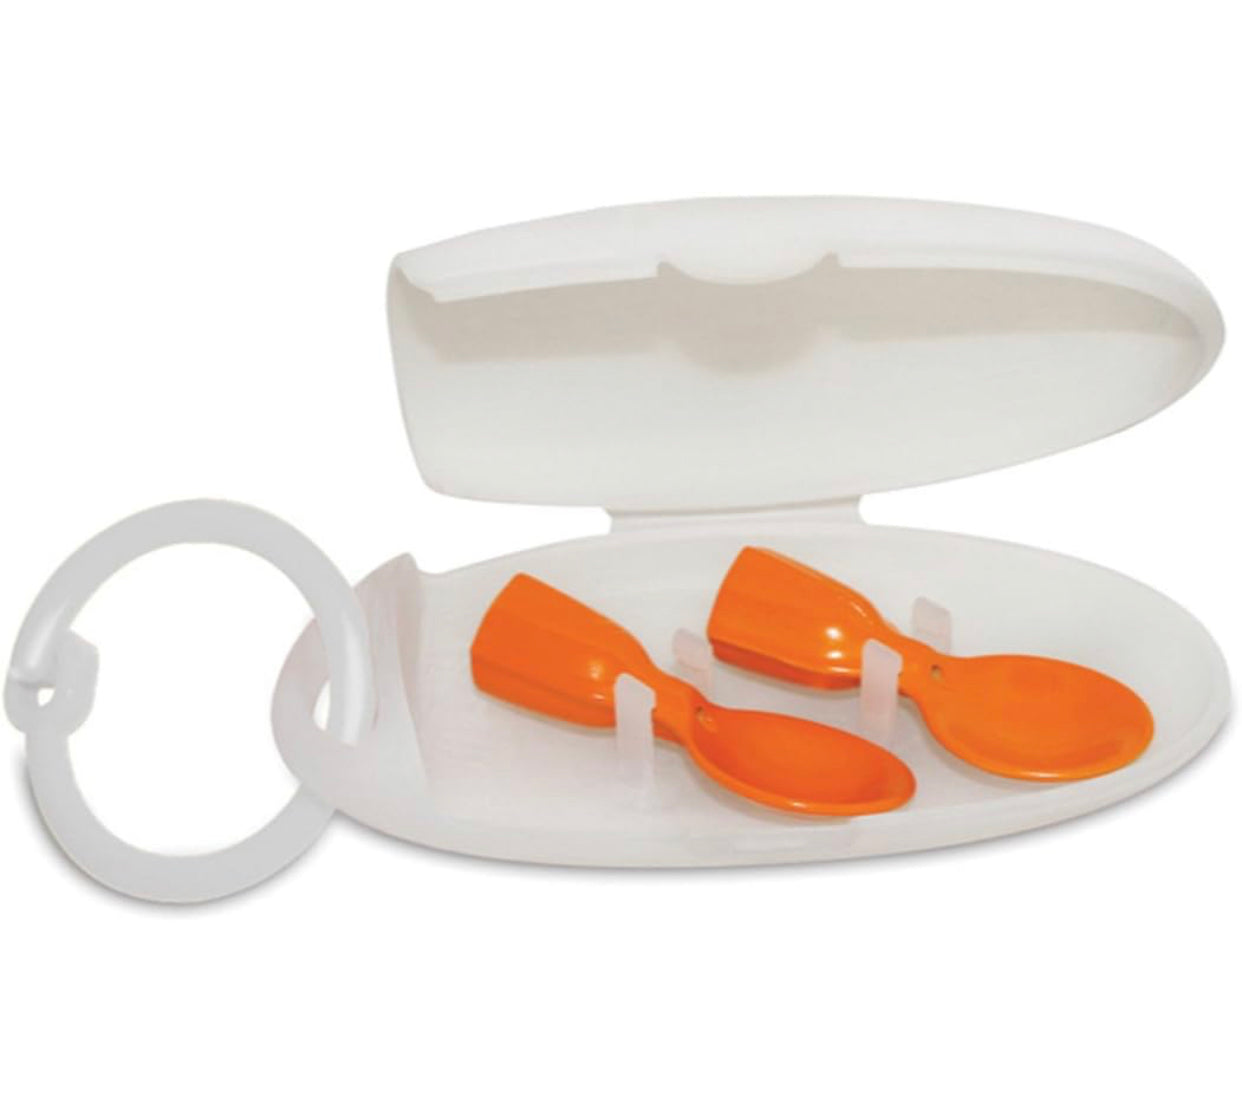 Infantino Couple a Spoons (fits most baby food pouches)